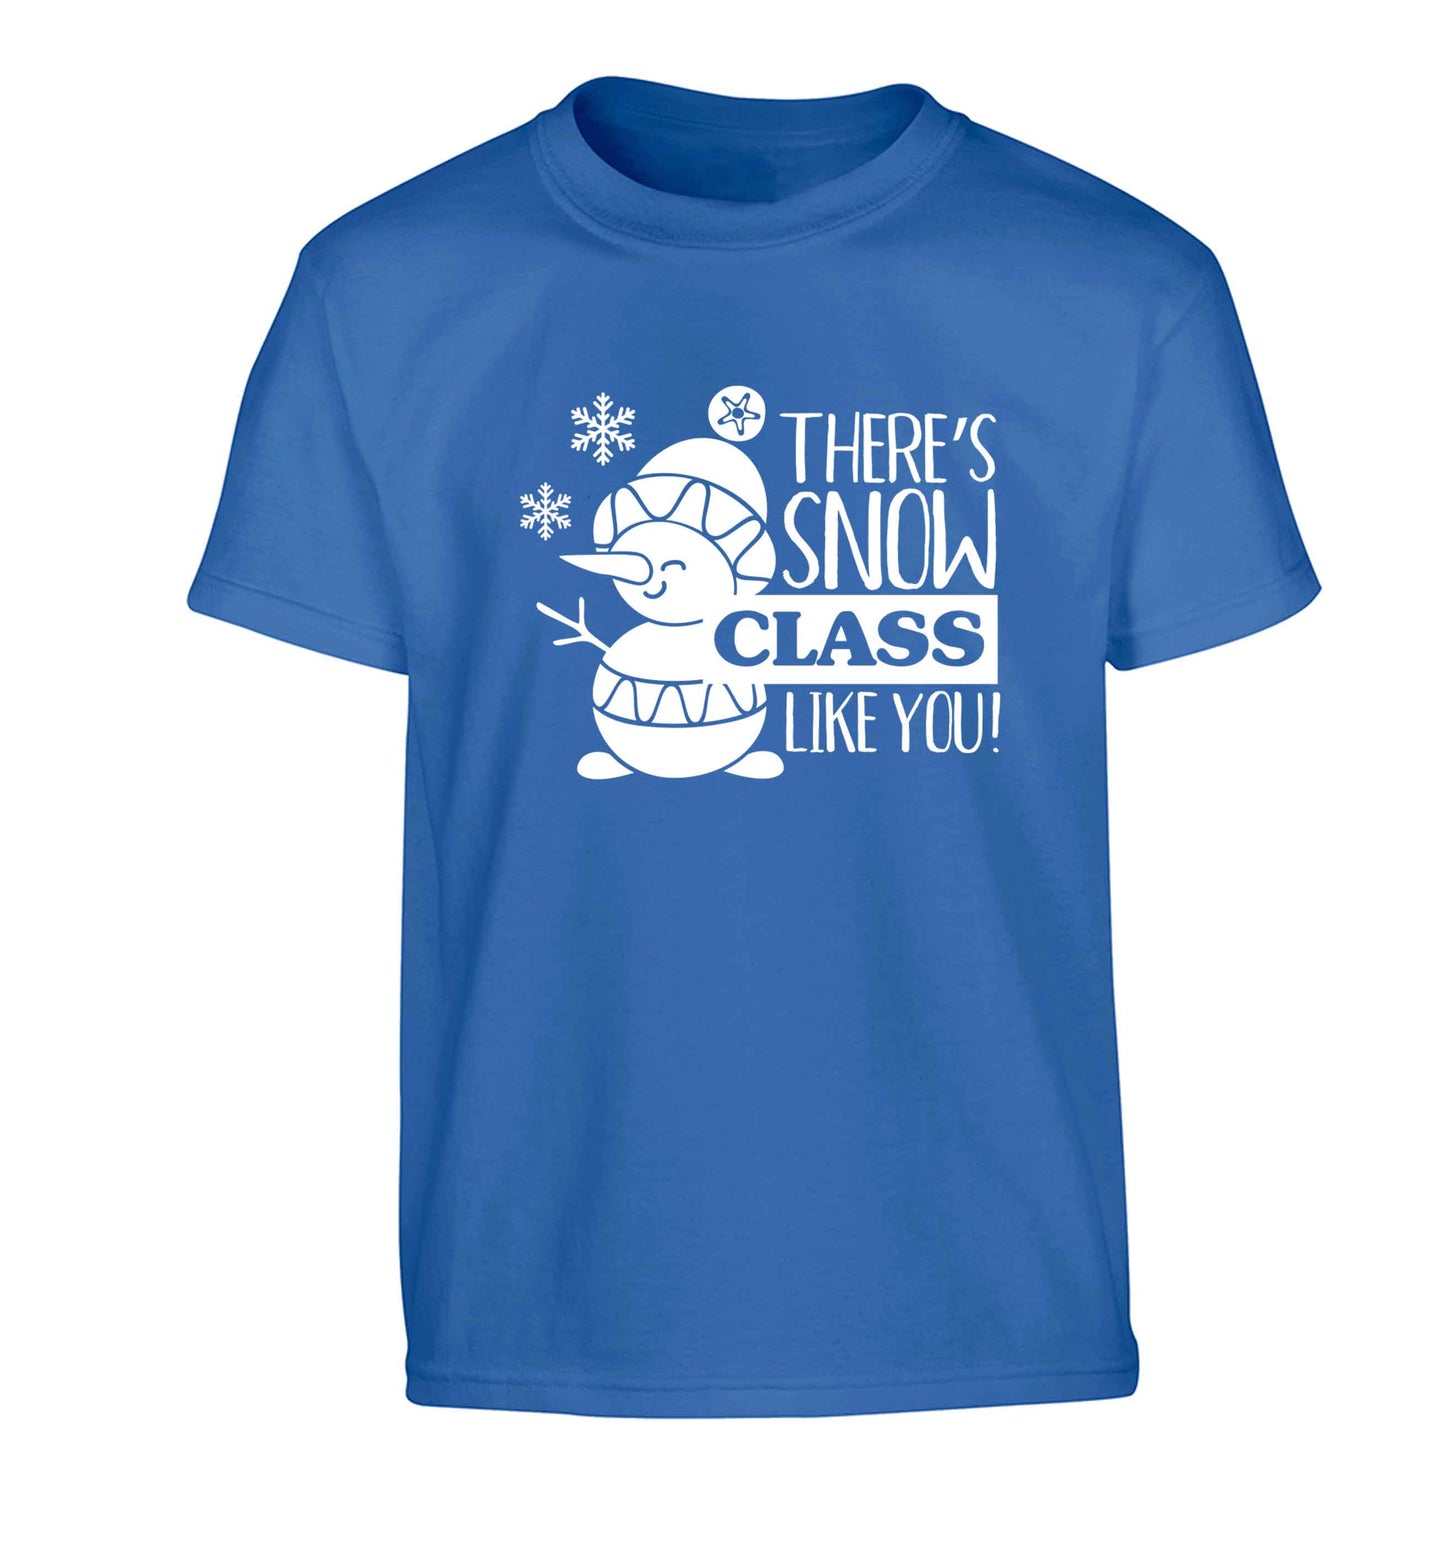 There's snow class like you Children's blue Tshirt 12-13 Years